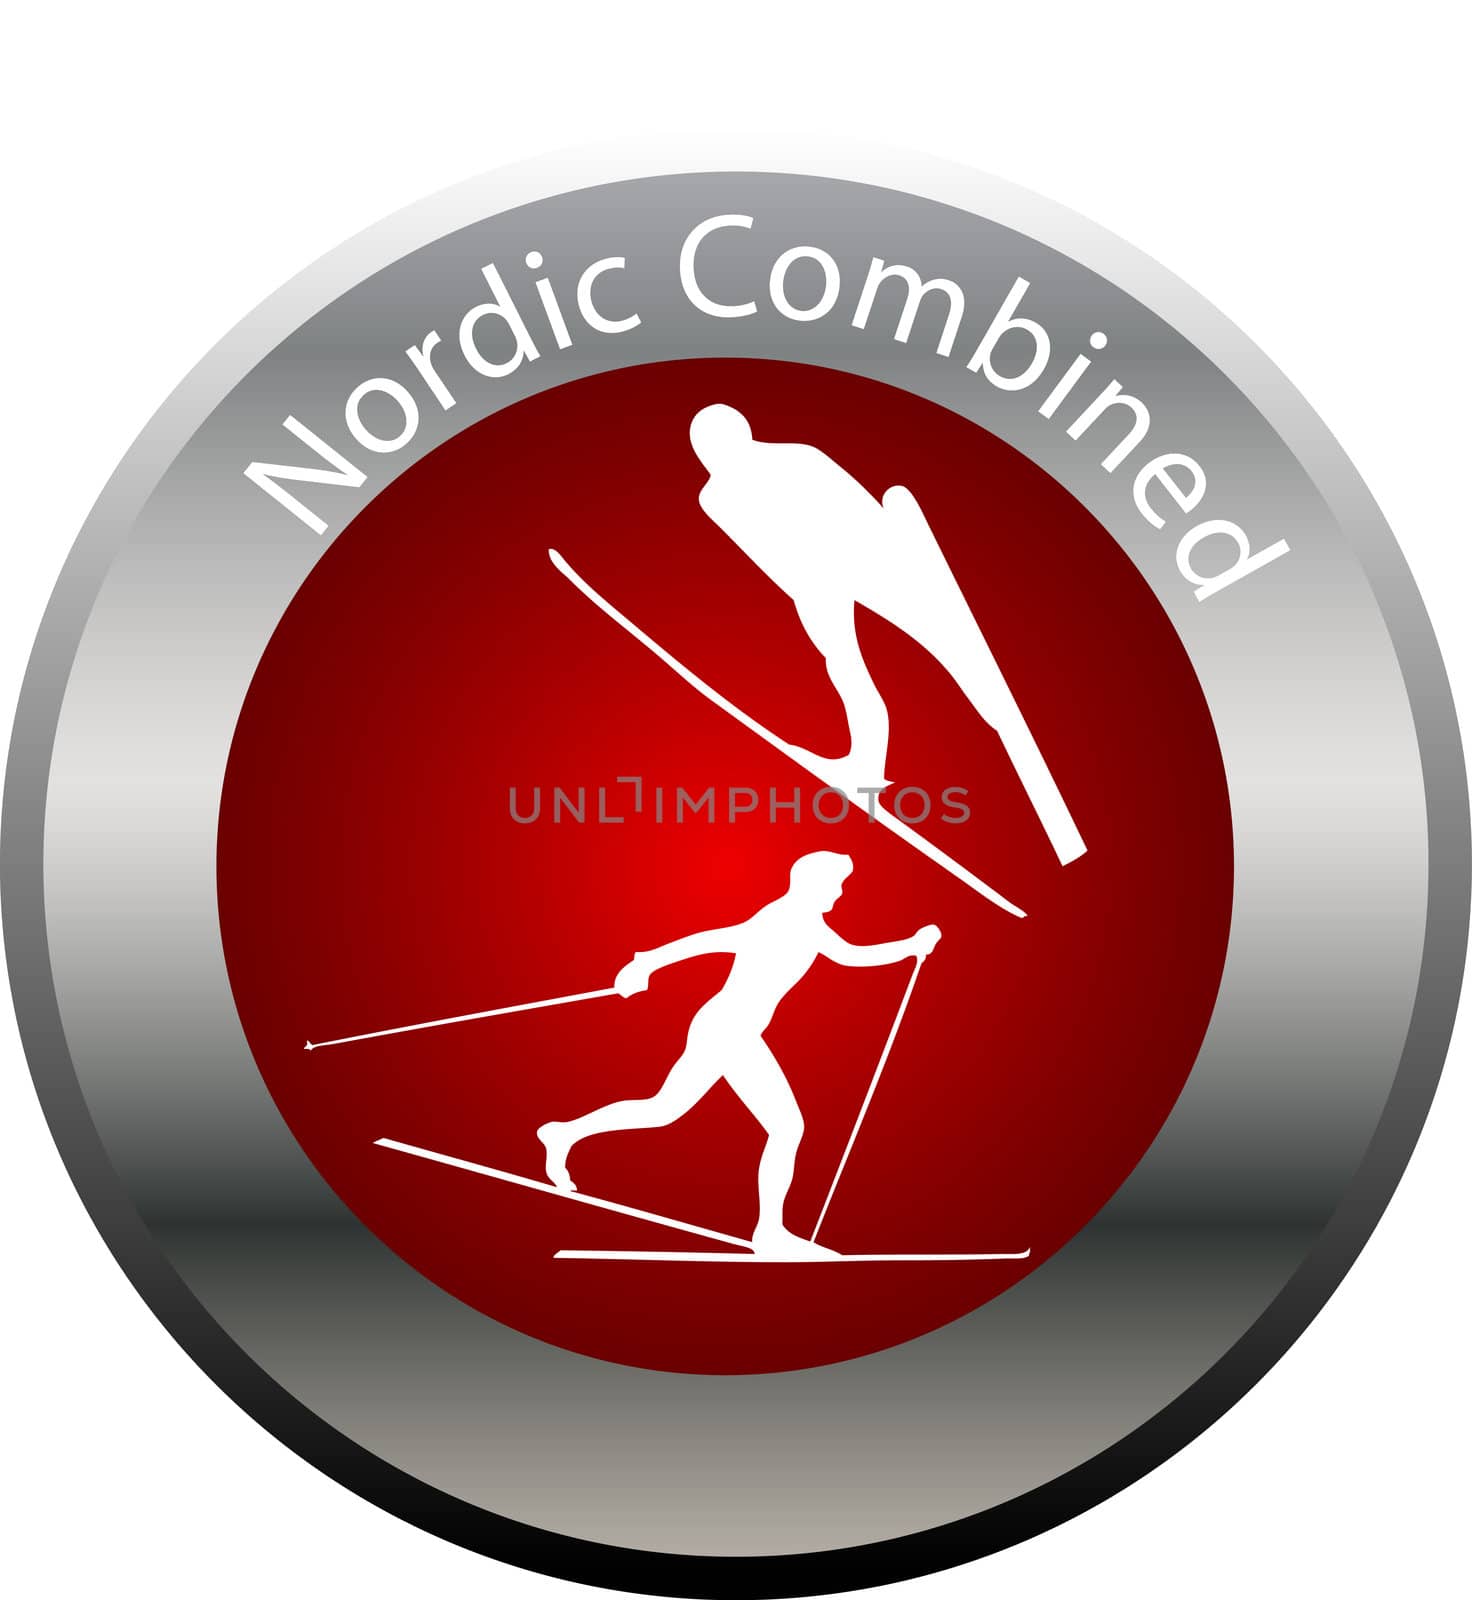 winter game button nordic combined by peromarketing